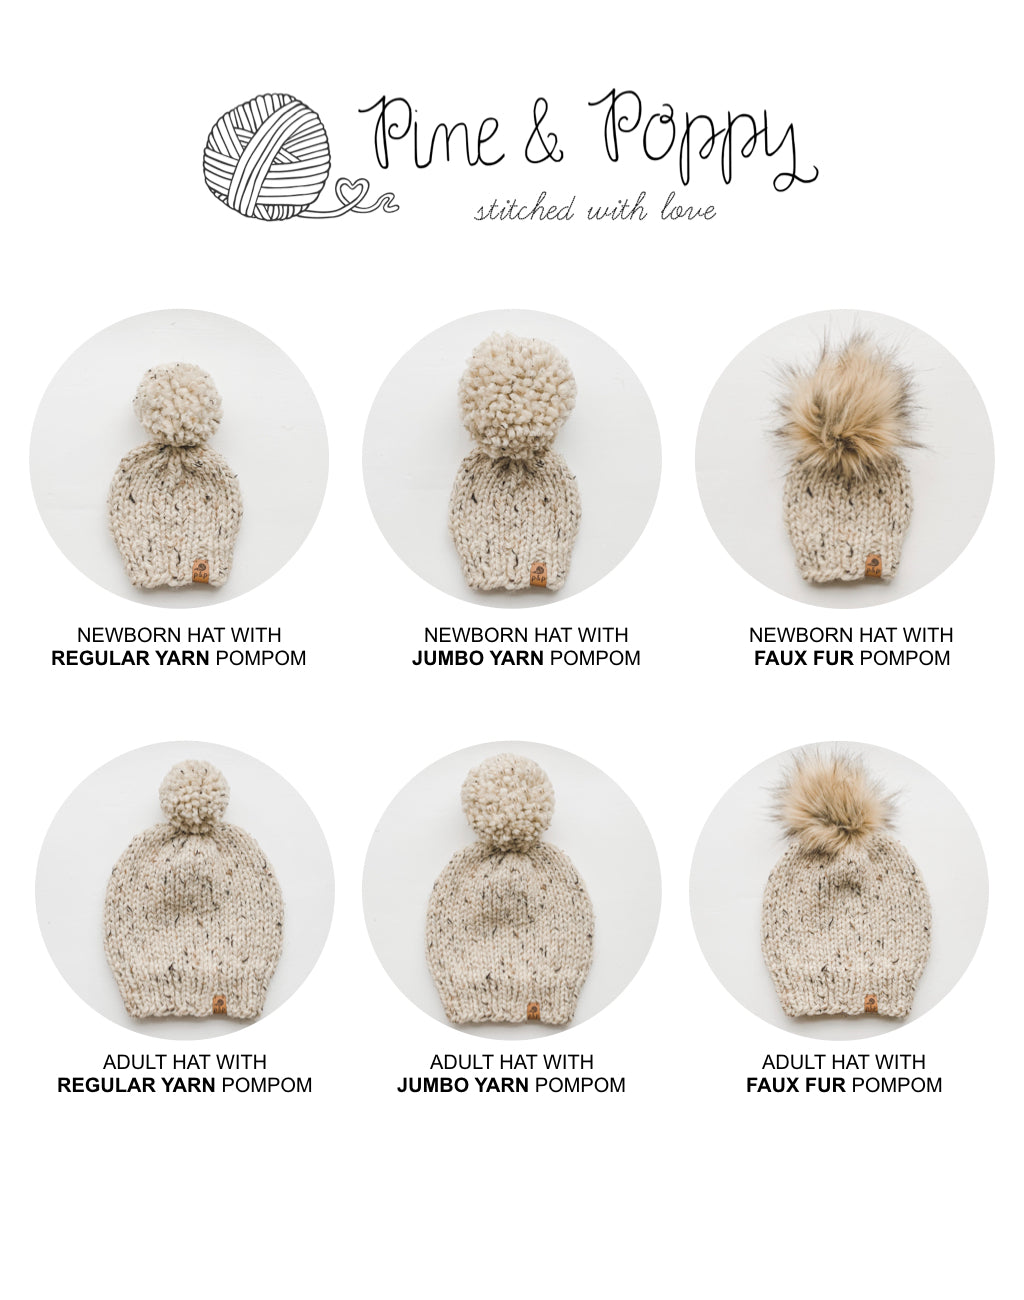 Pompom ONLY for the hat you make!